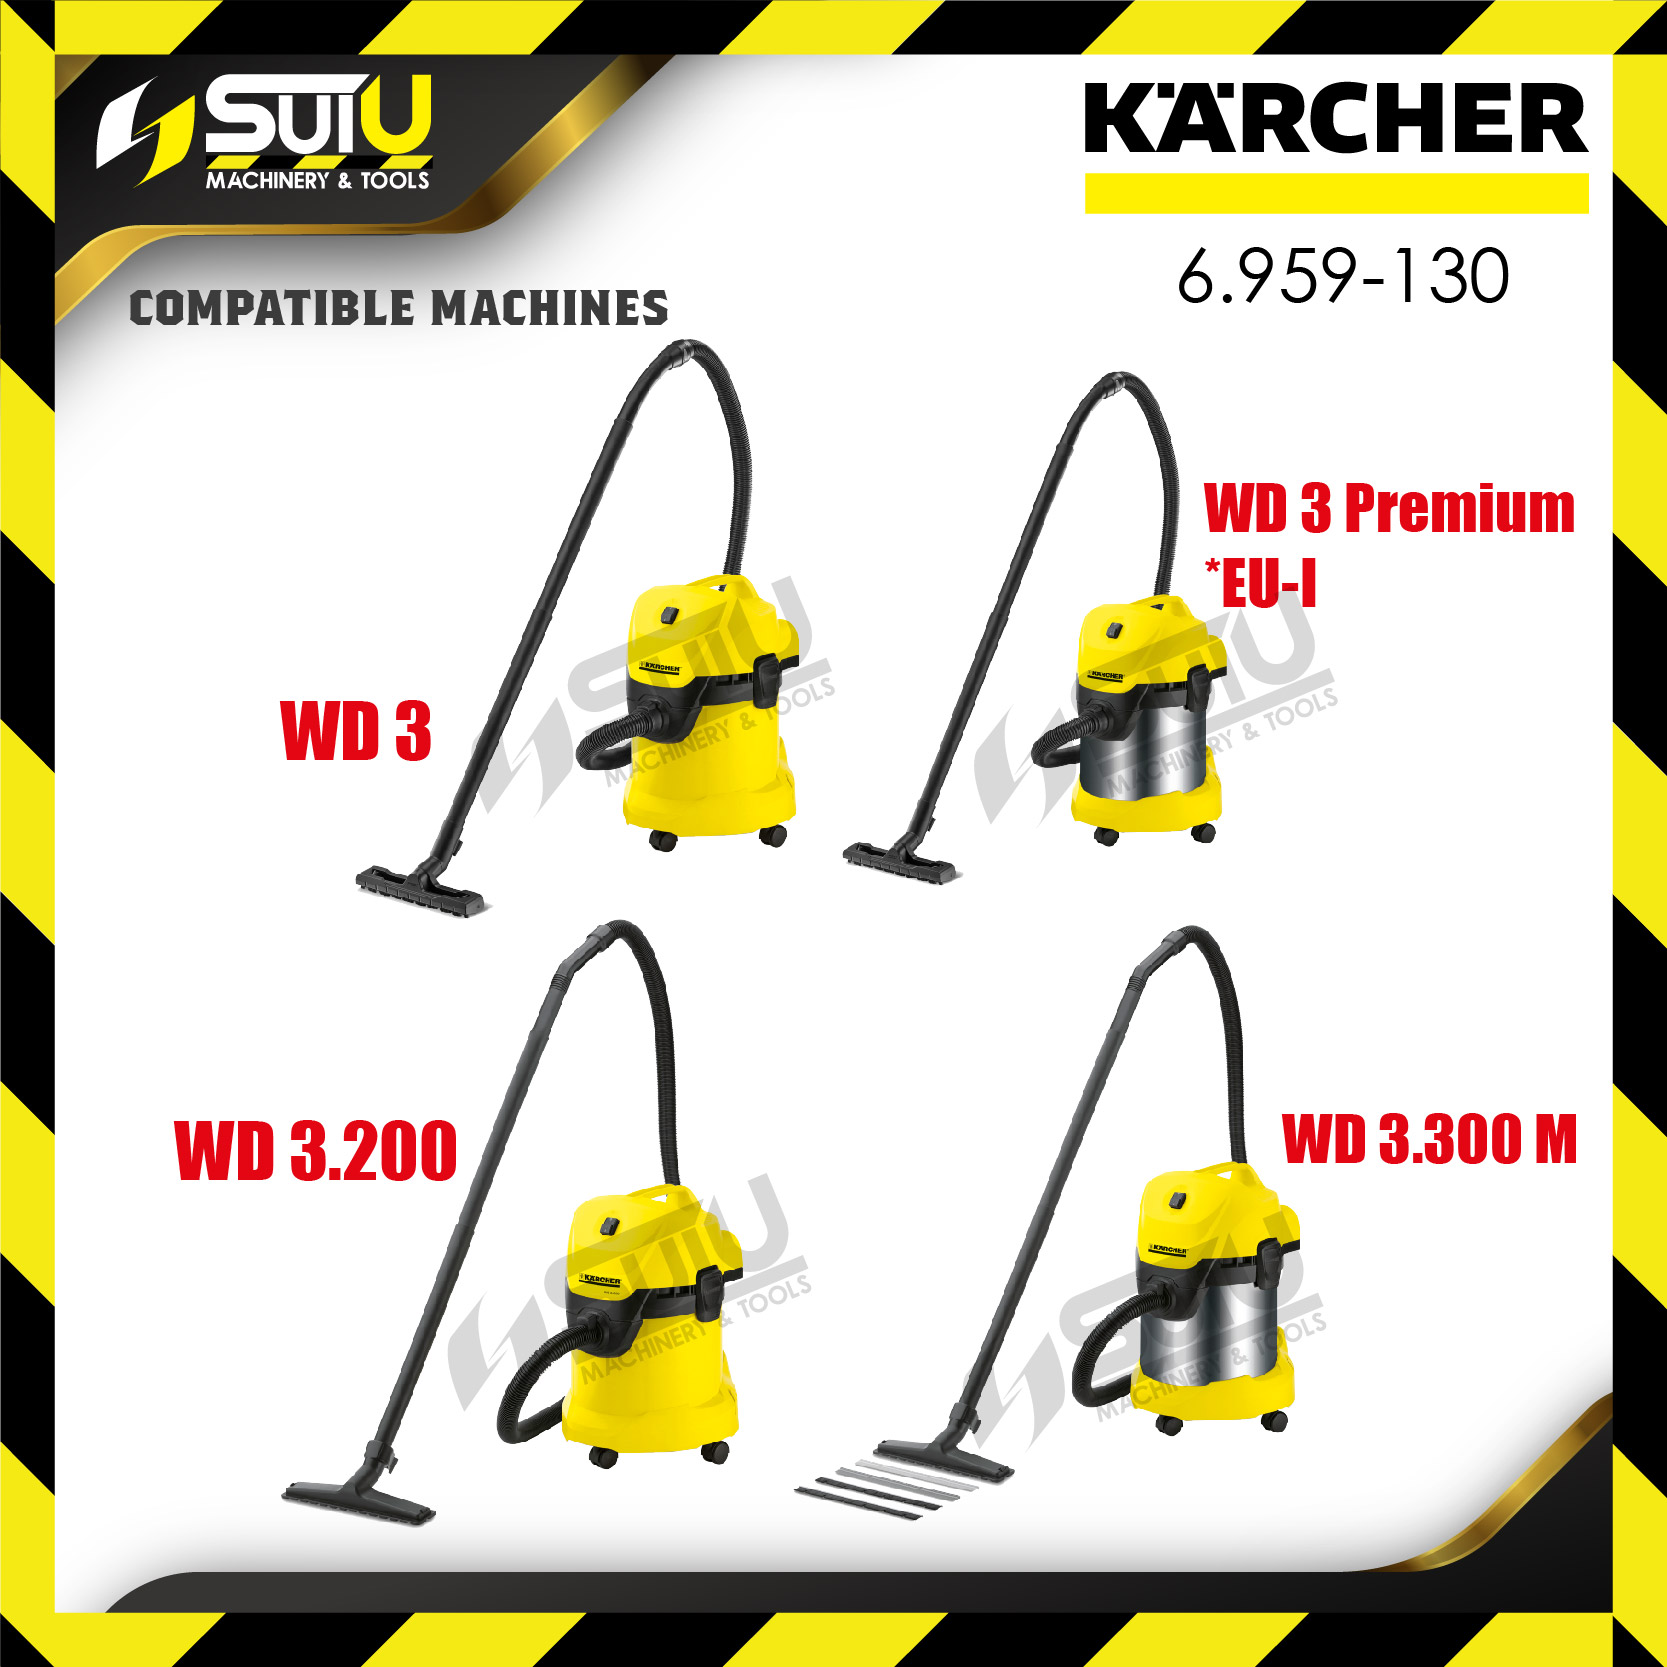 KARCHER 6.959-130 5PCS Paper Filter Bag / Dust Bag for WD3 / WD3 Premium  *Eu-1 / WD3.200 / WD3.300M Vacuum Cleaner Cleaning Equipment Kuala Lumpur  (KL), Malaysia, Selangor, Setapak Supplier, Suppliers, Supply,